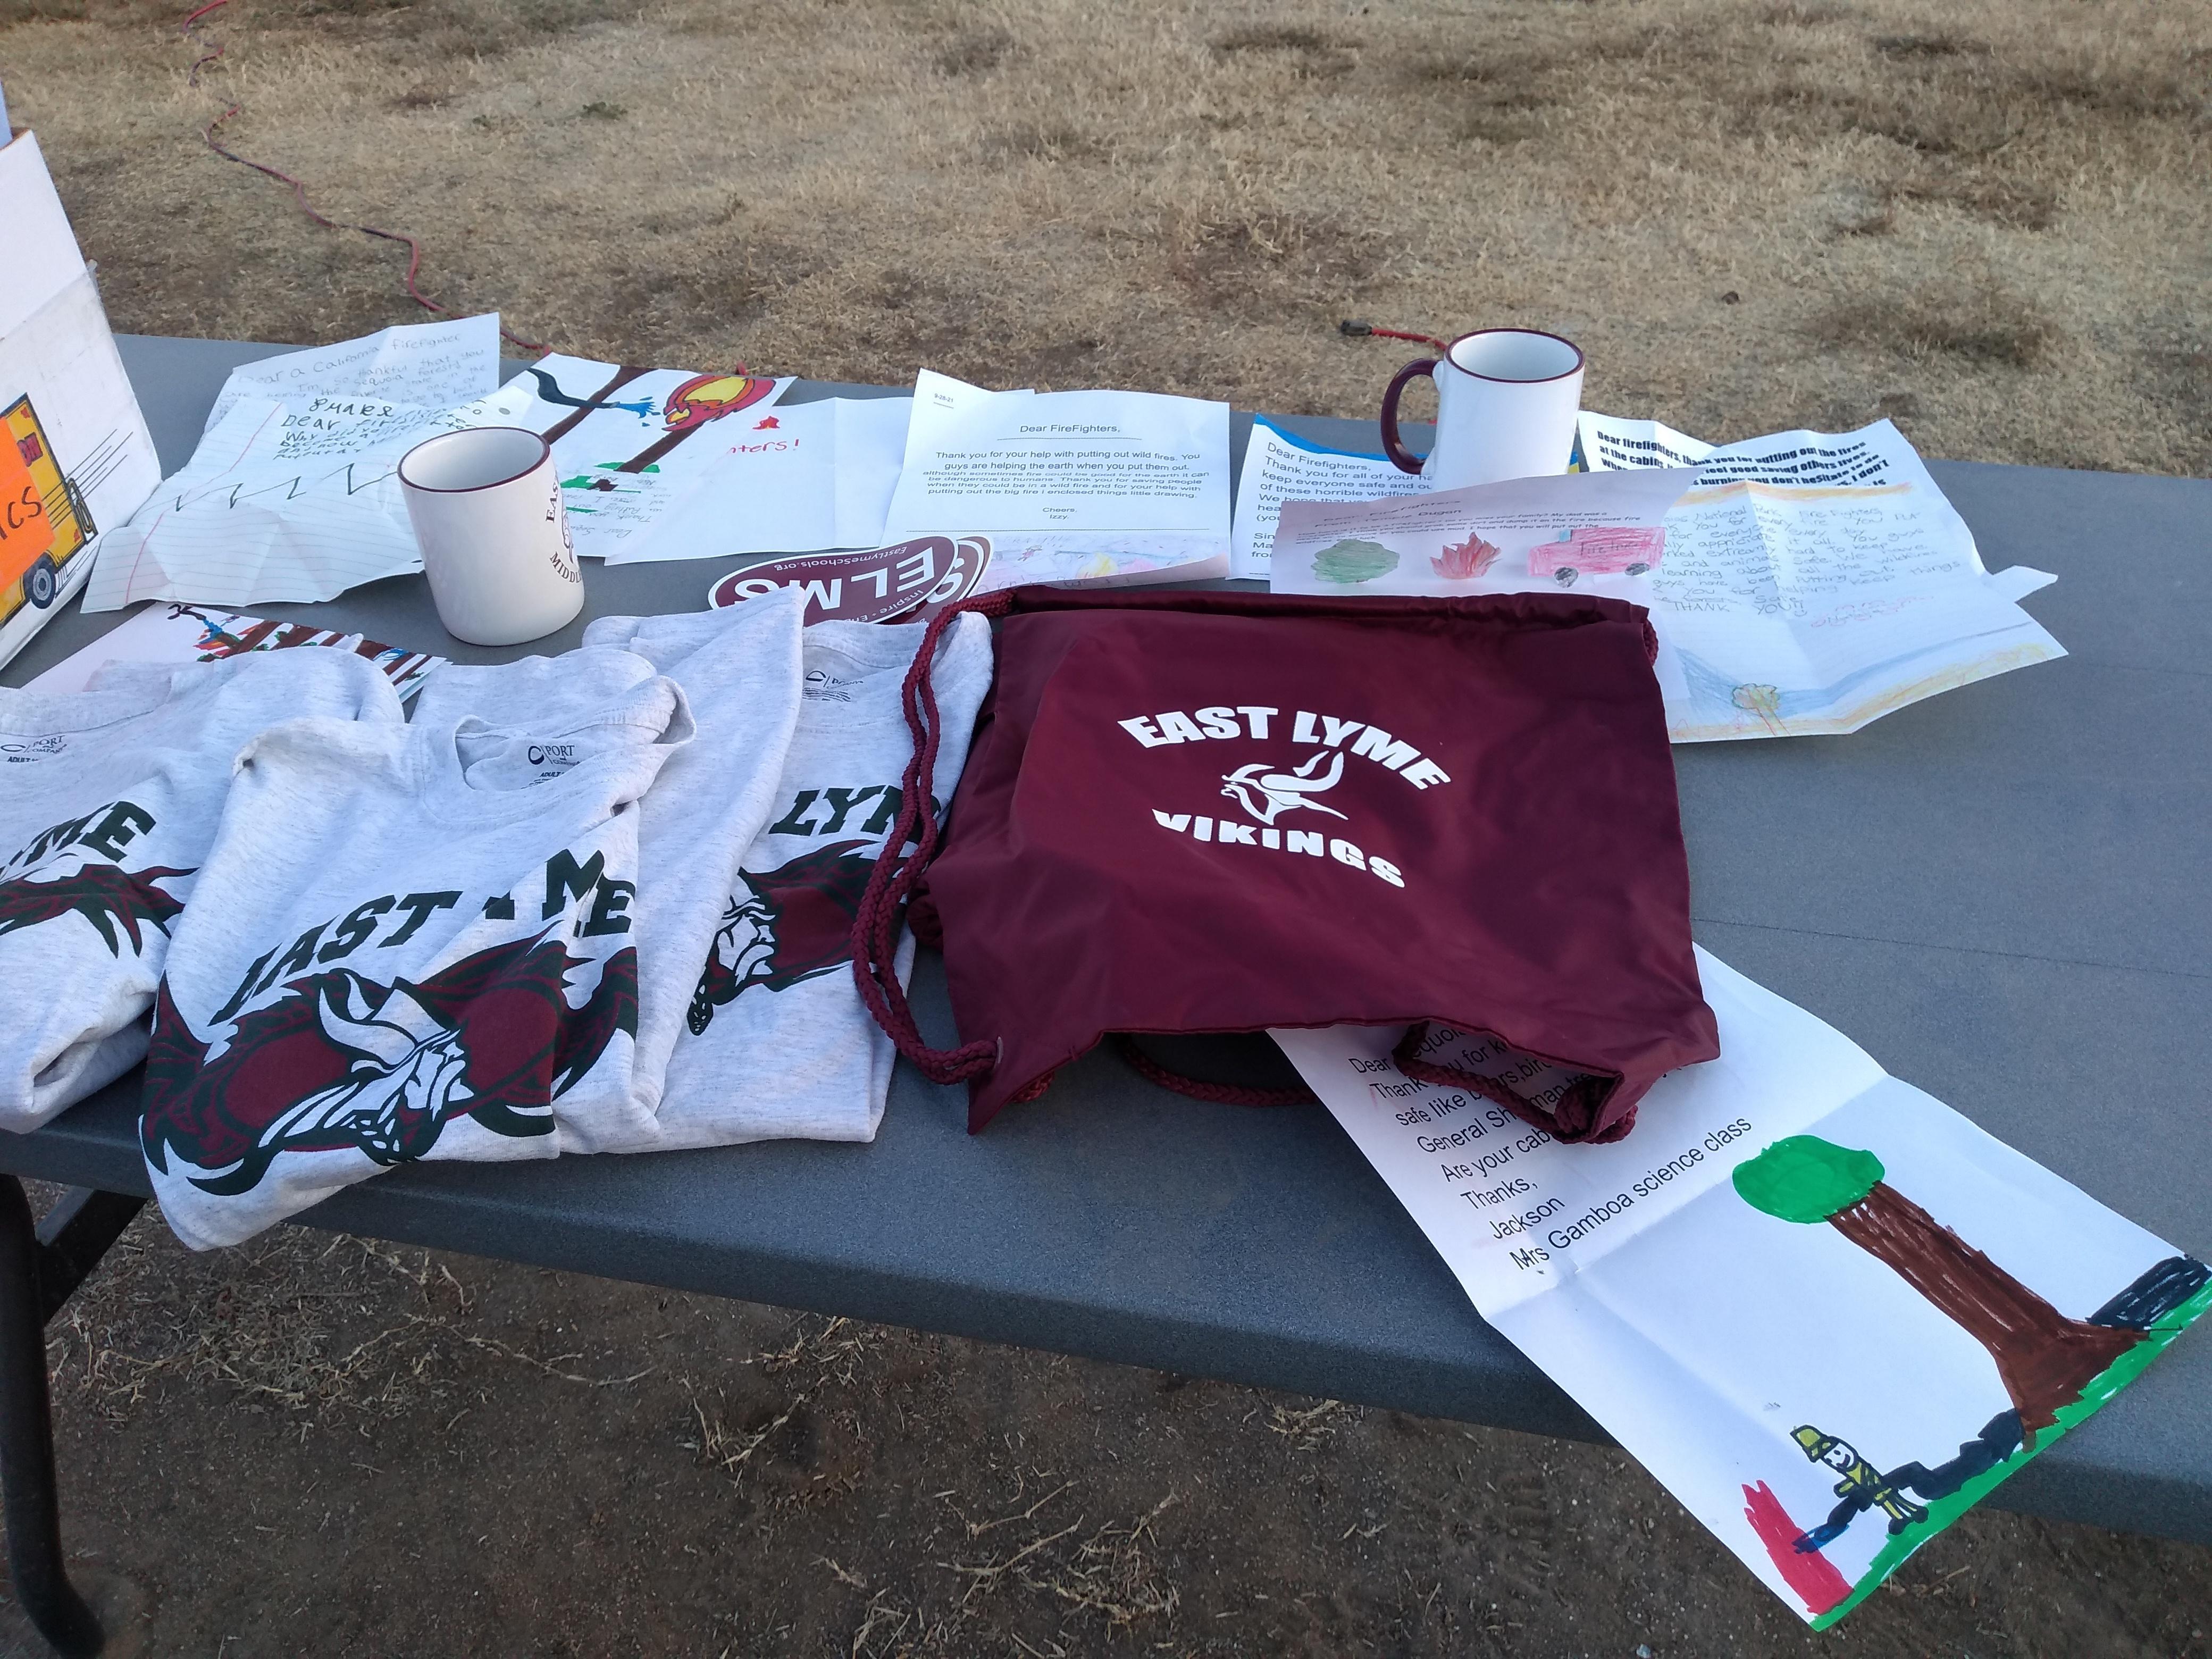 A table with colorful letters from students plus T-shirts, mugs, stickers and bags with the East Lyme Middle School Vikings logo.